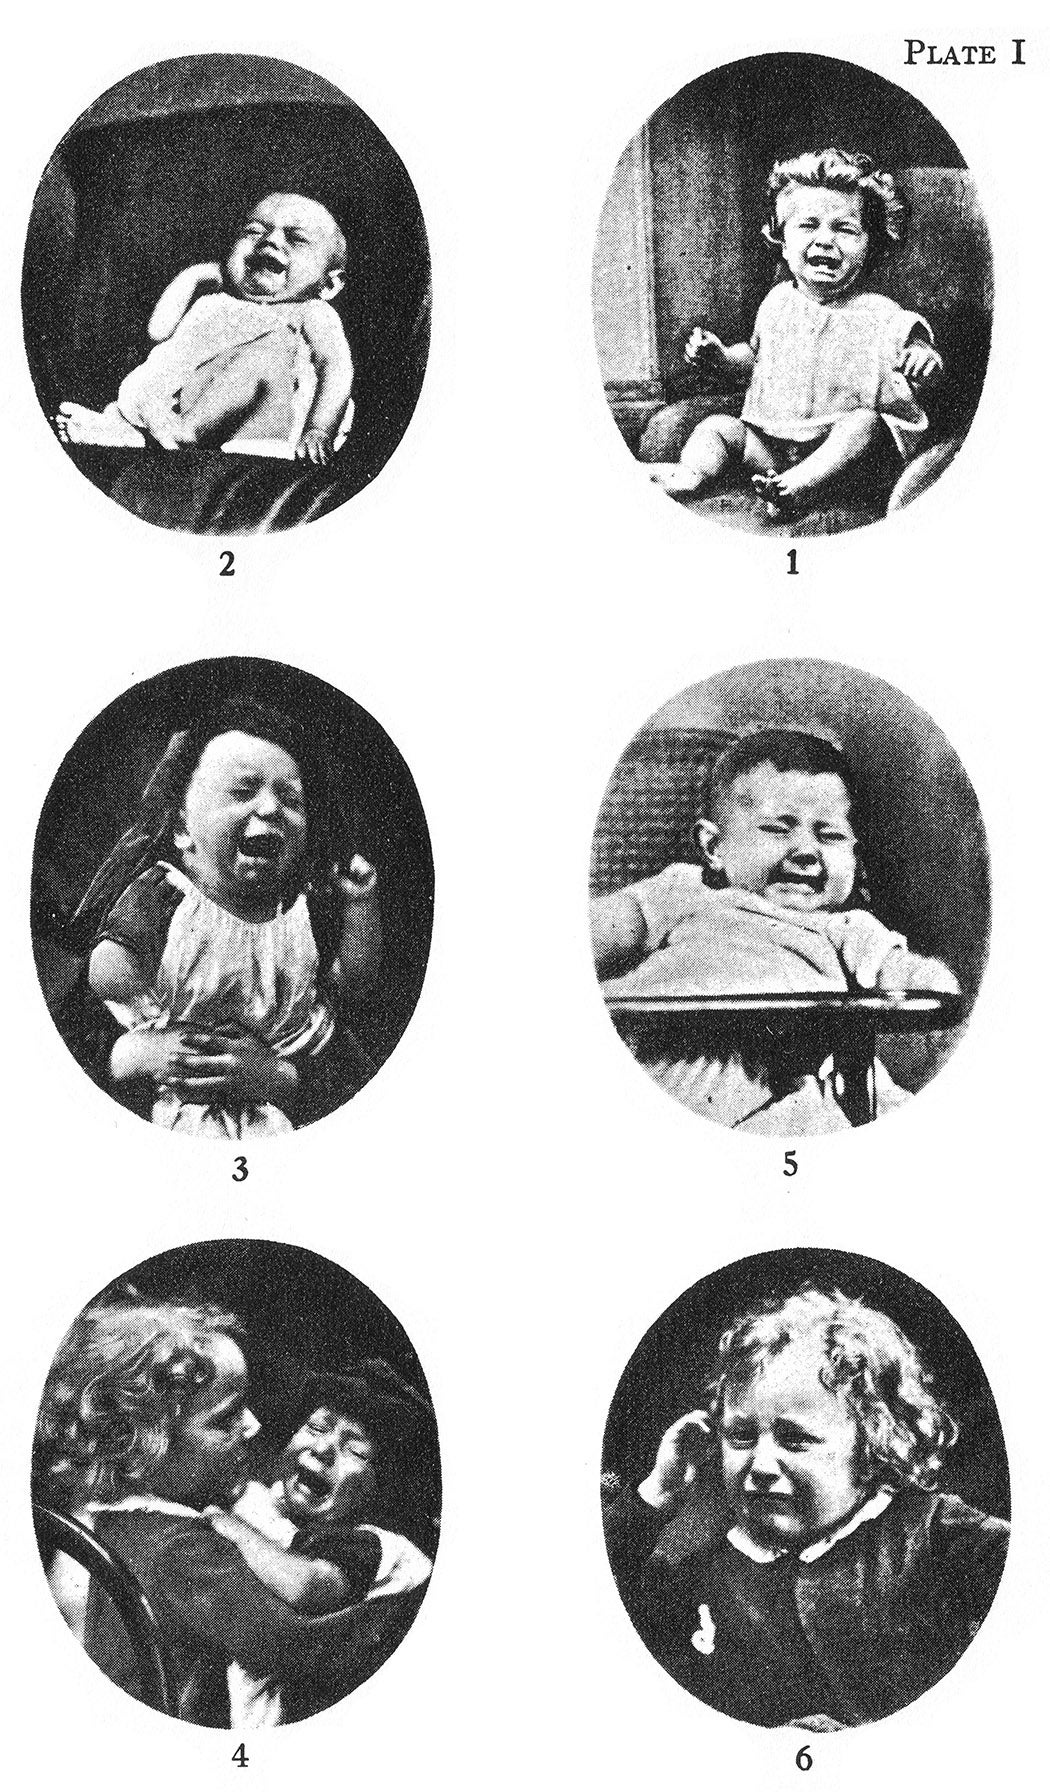 Plate I from Charles Darwin's The Expression of the Emotions in Man and Animals. From Chapter VI: SPECIAL EXPRESSIONS OF MAN: SUFFERING AND WEEPING.